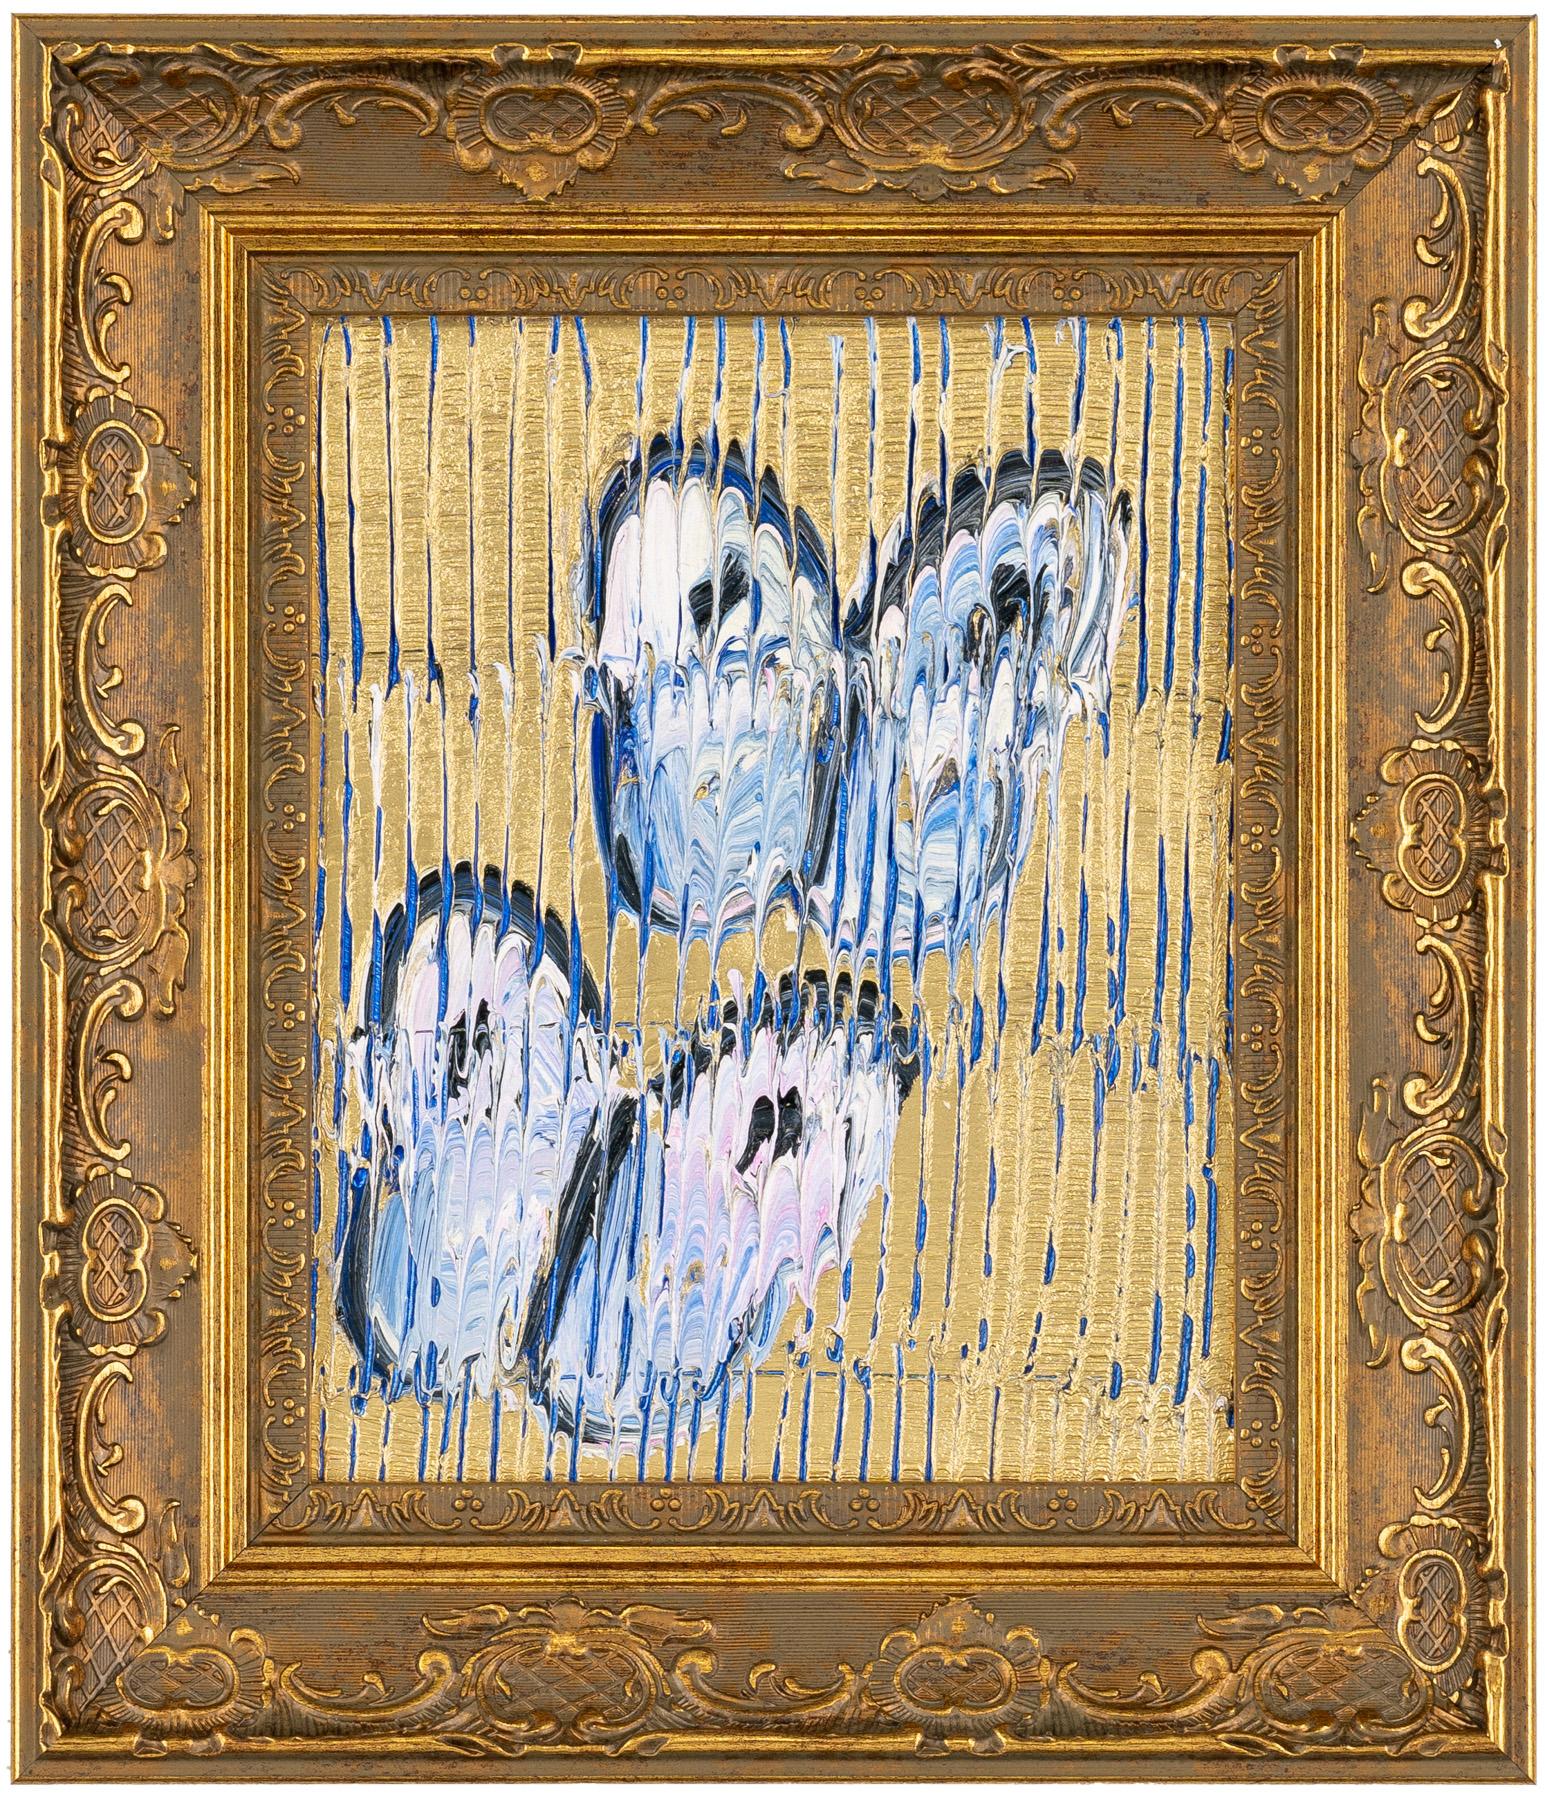 Hunt Slonem "Ascension" Light Blue Butterflies on Gold Metallic
Black outlined light blue and white butterflies on a blue etched gold metallic background in a gold vintage frame.

Unframed: 10 x 8 inches
Framed: 14.5 x 12.5 inches
*Painting is